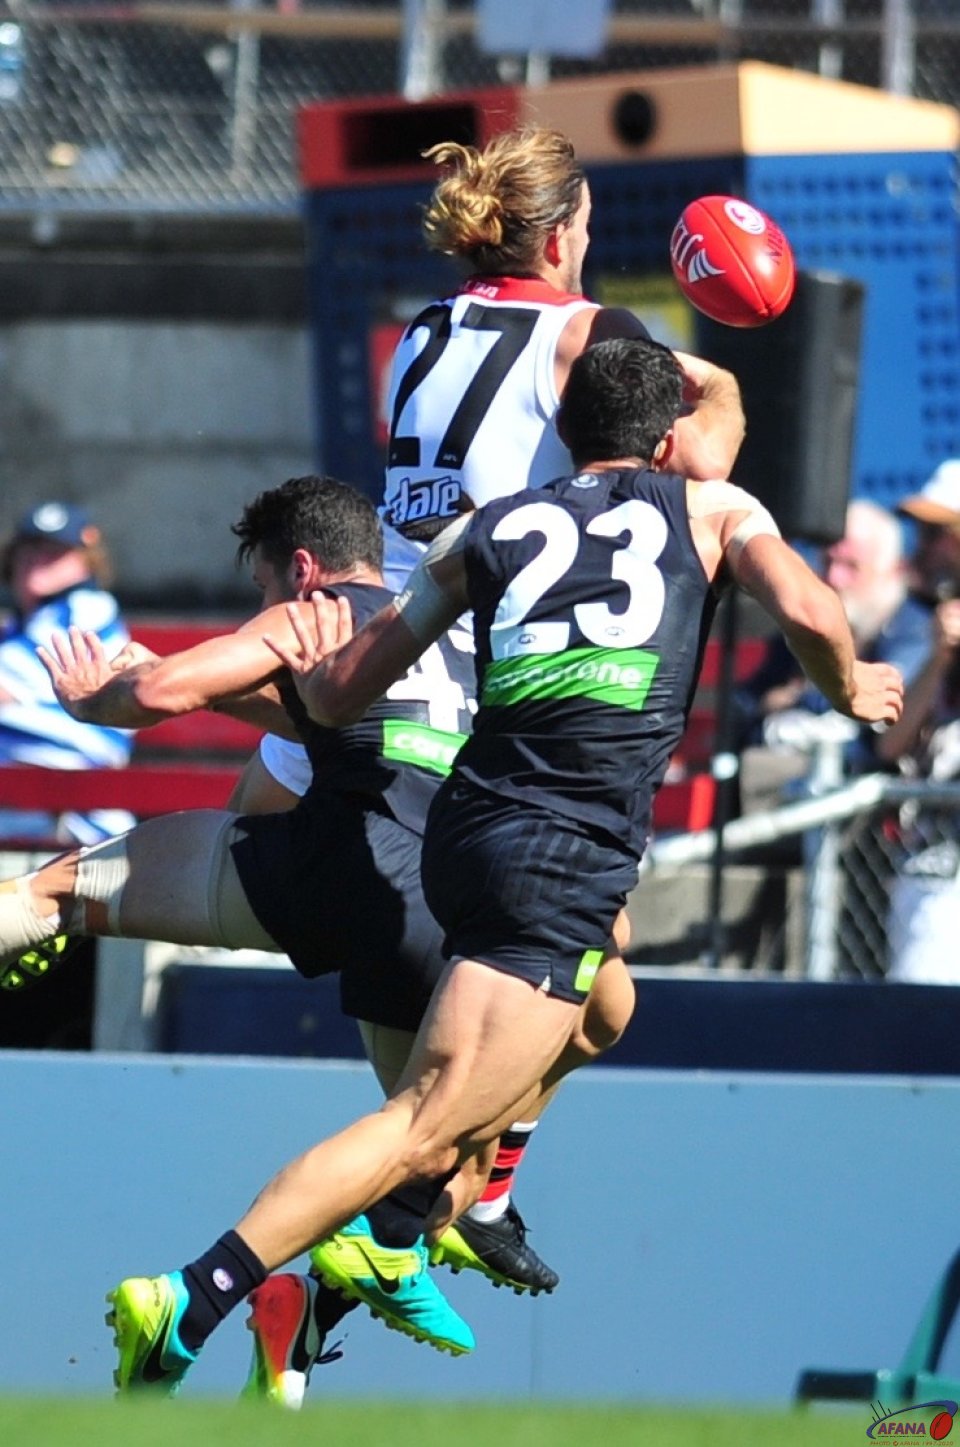 Josh Bruce and new Carlton recruit Jacob Weitering (23) go for the ball